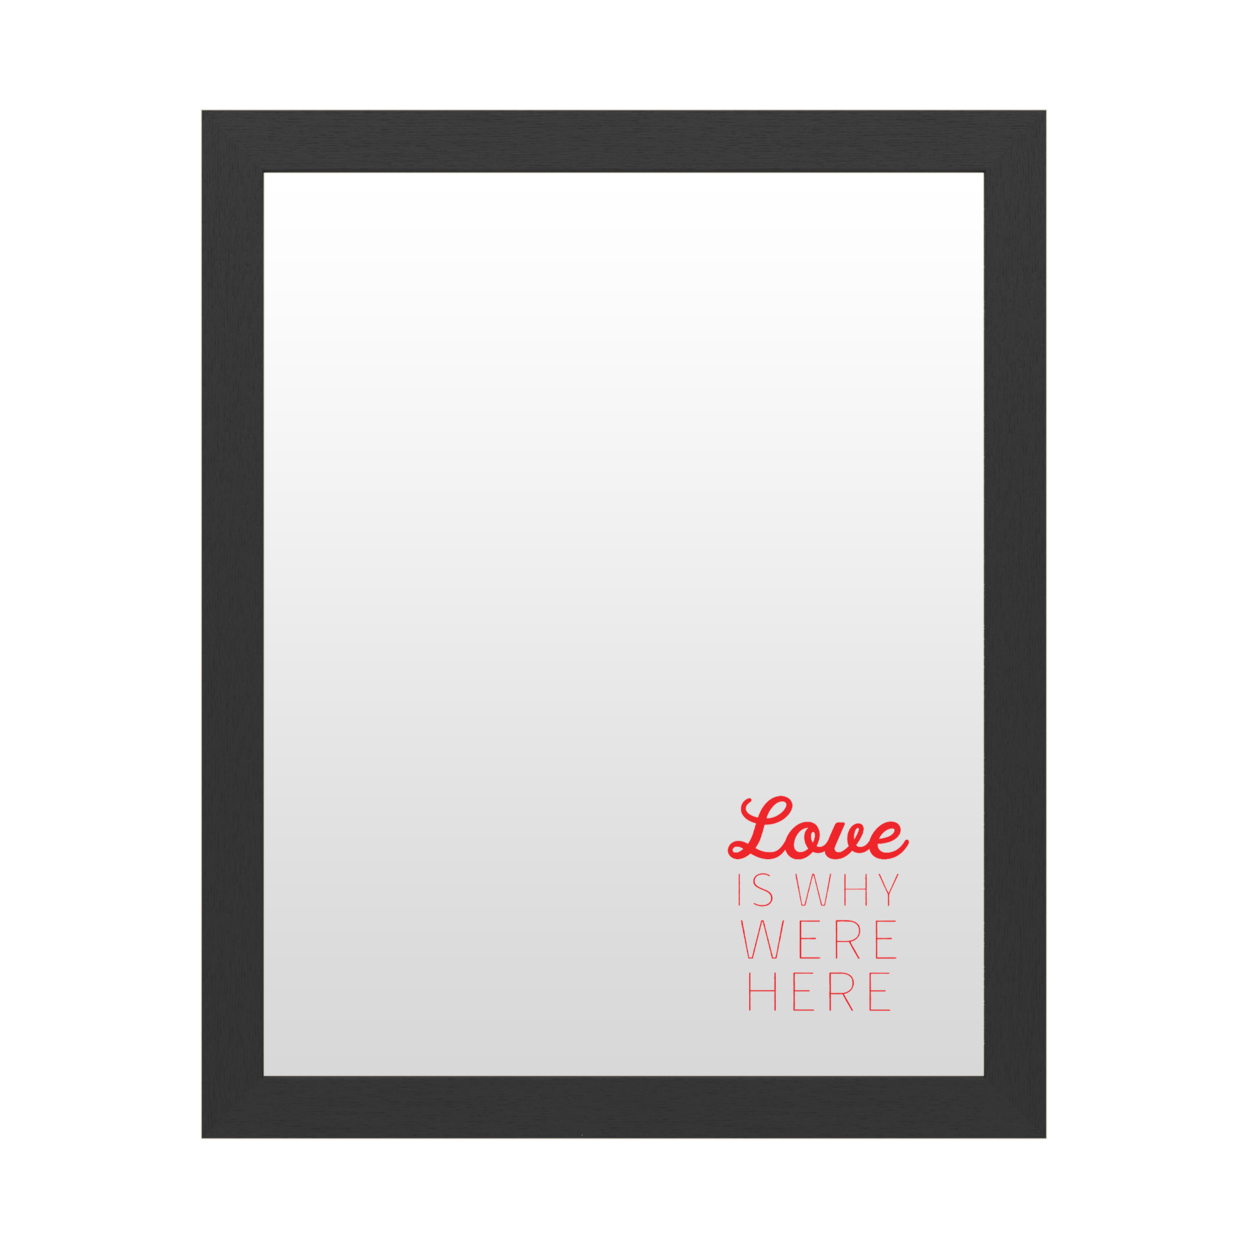 Dry Erase 16 X 20 Marker Board With Printed Artwork - Love Is Why Were Here 2 White Board - Ready To Hang